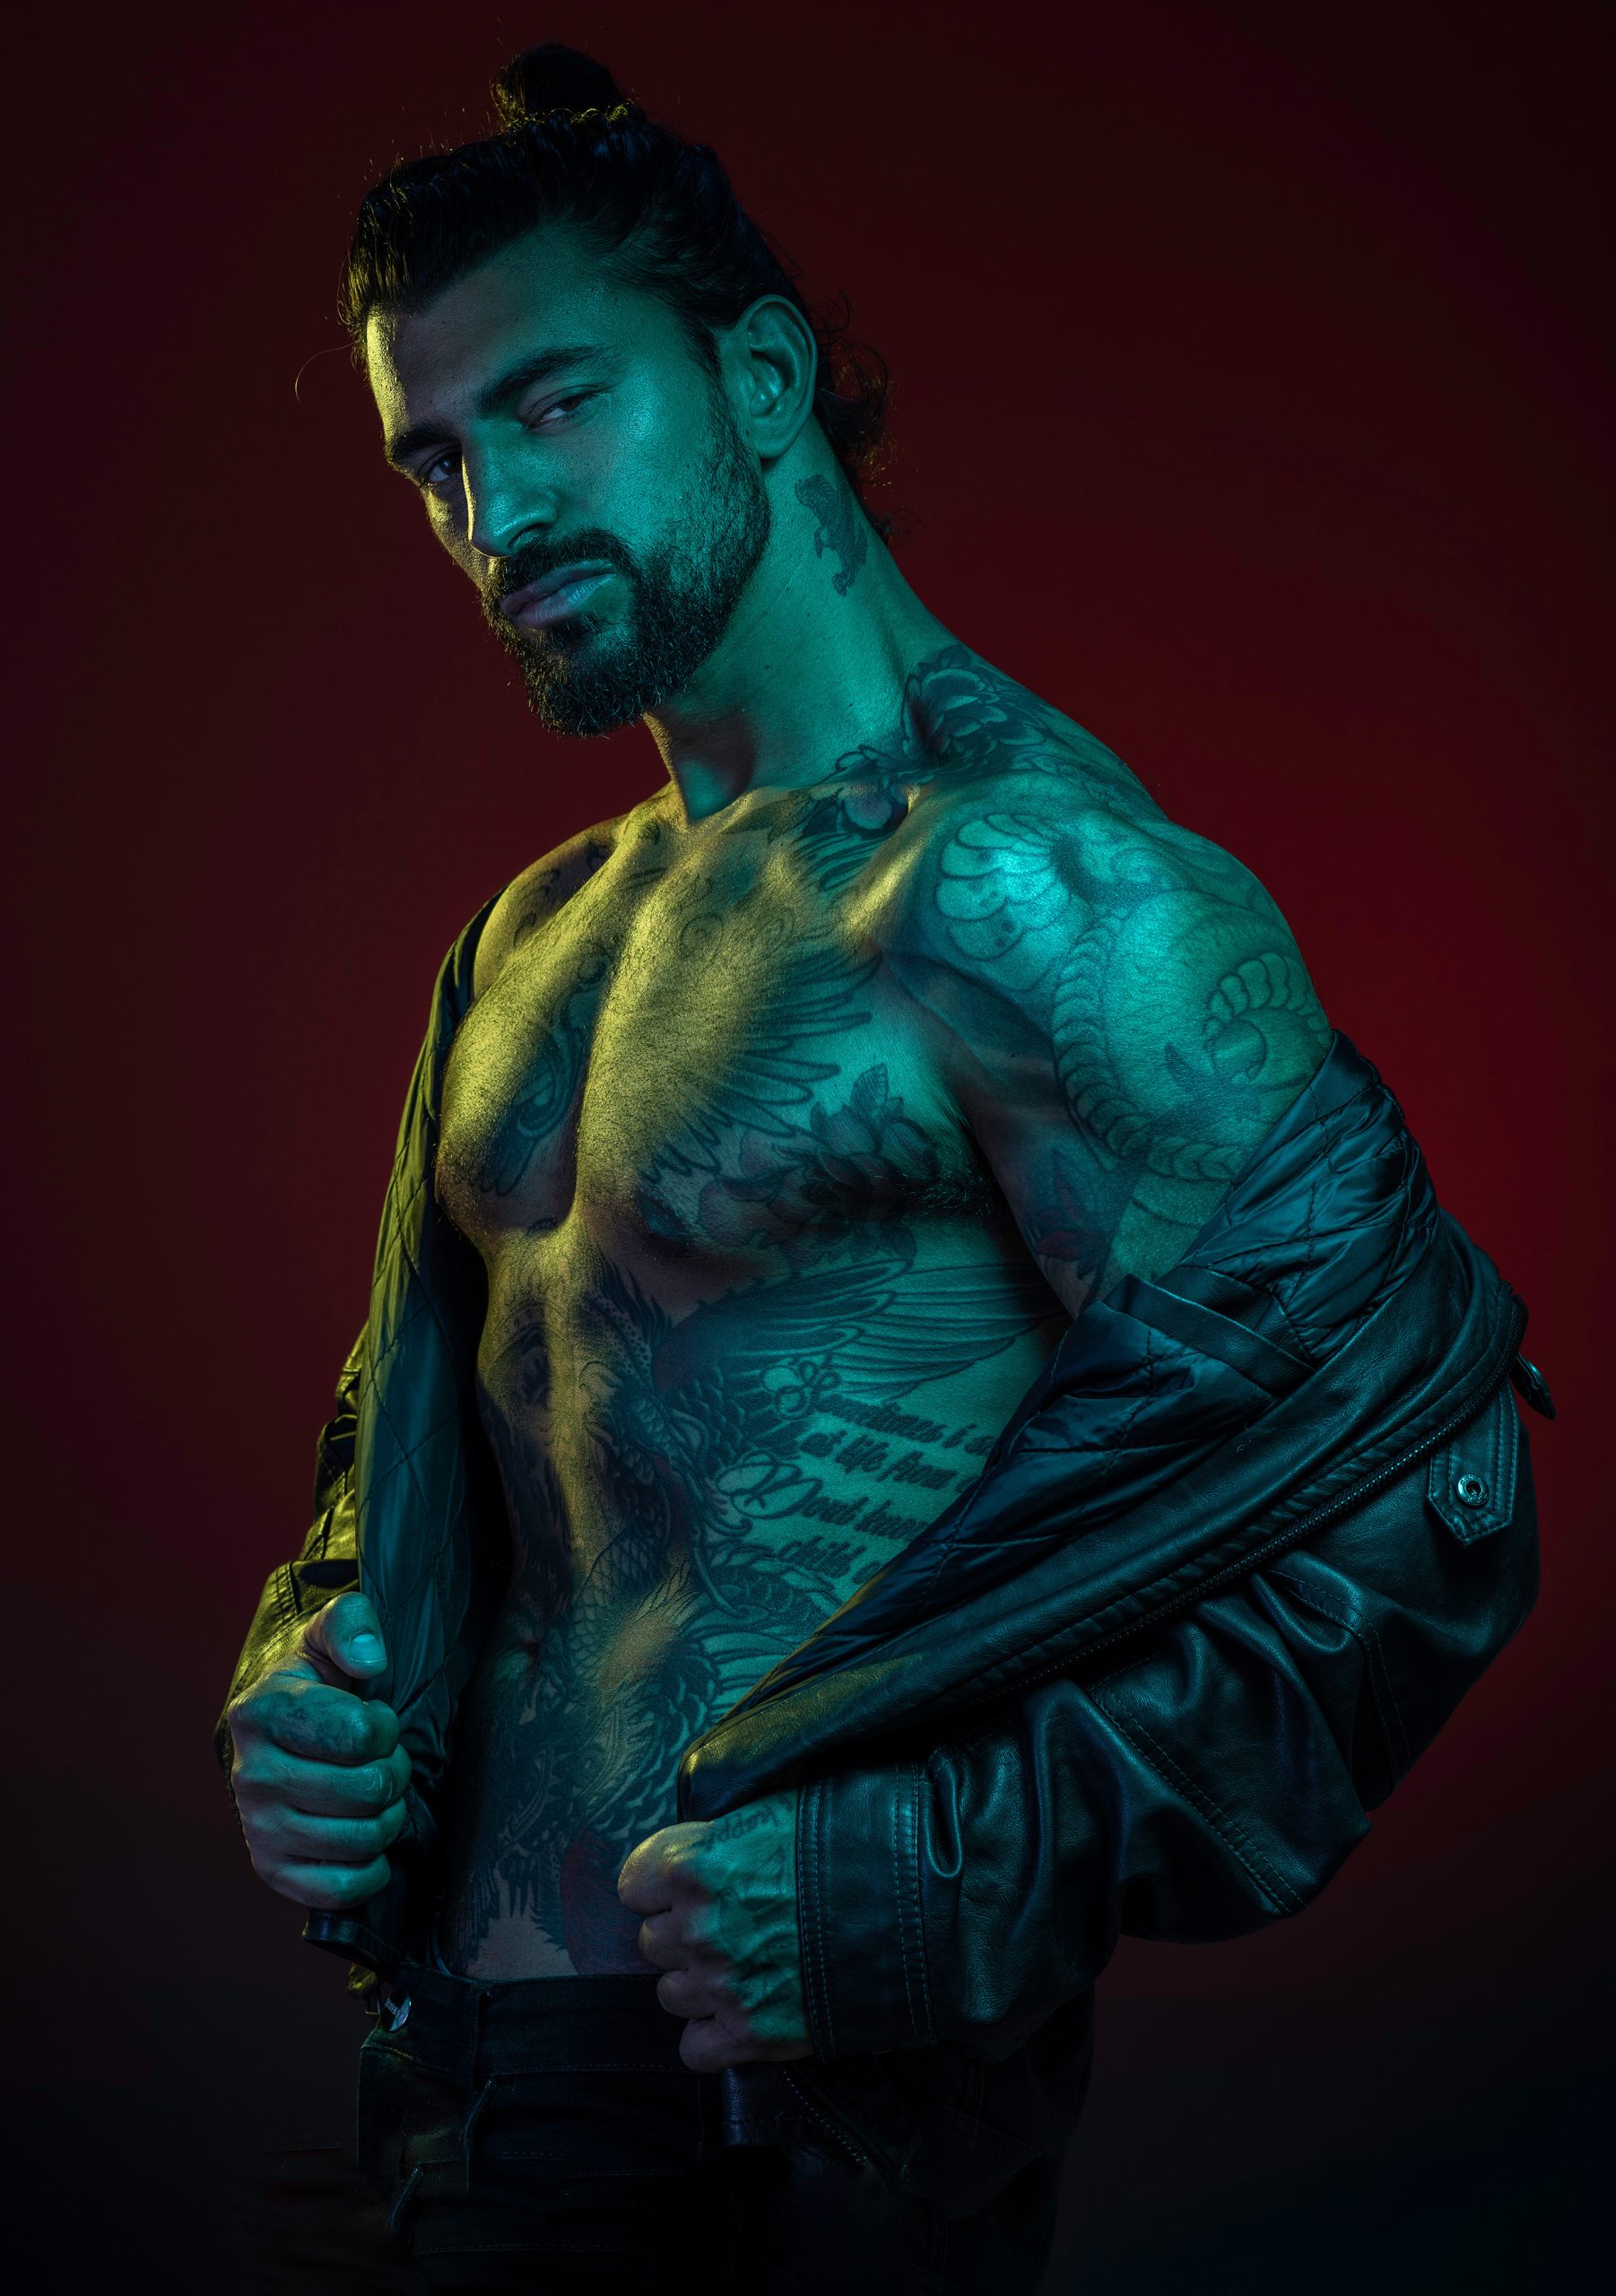 A male with muscular features covered with tattoos posing for a picture with dark red background and blue green gel color